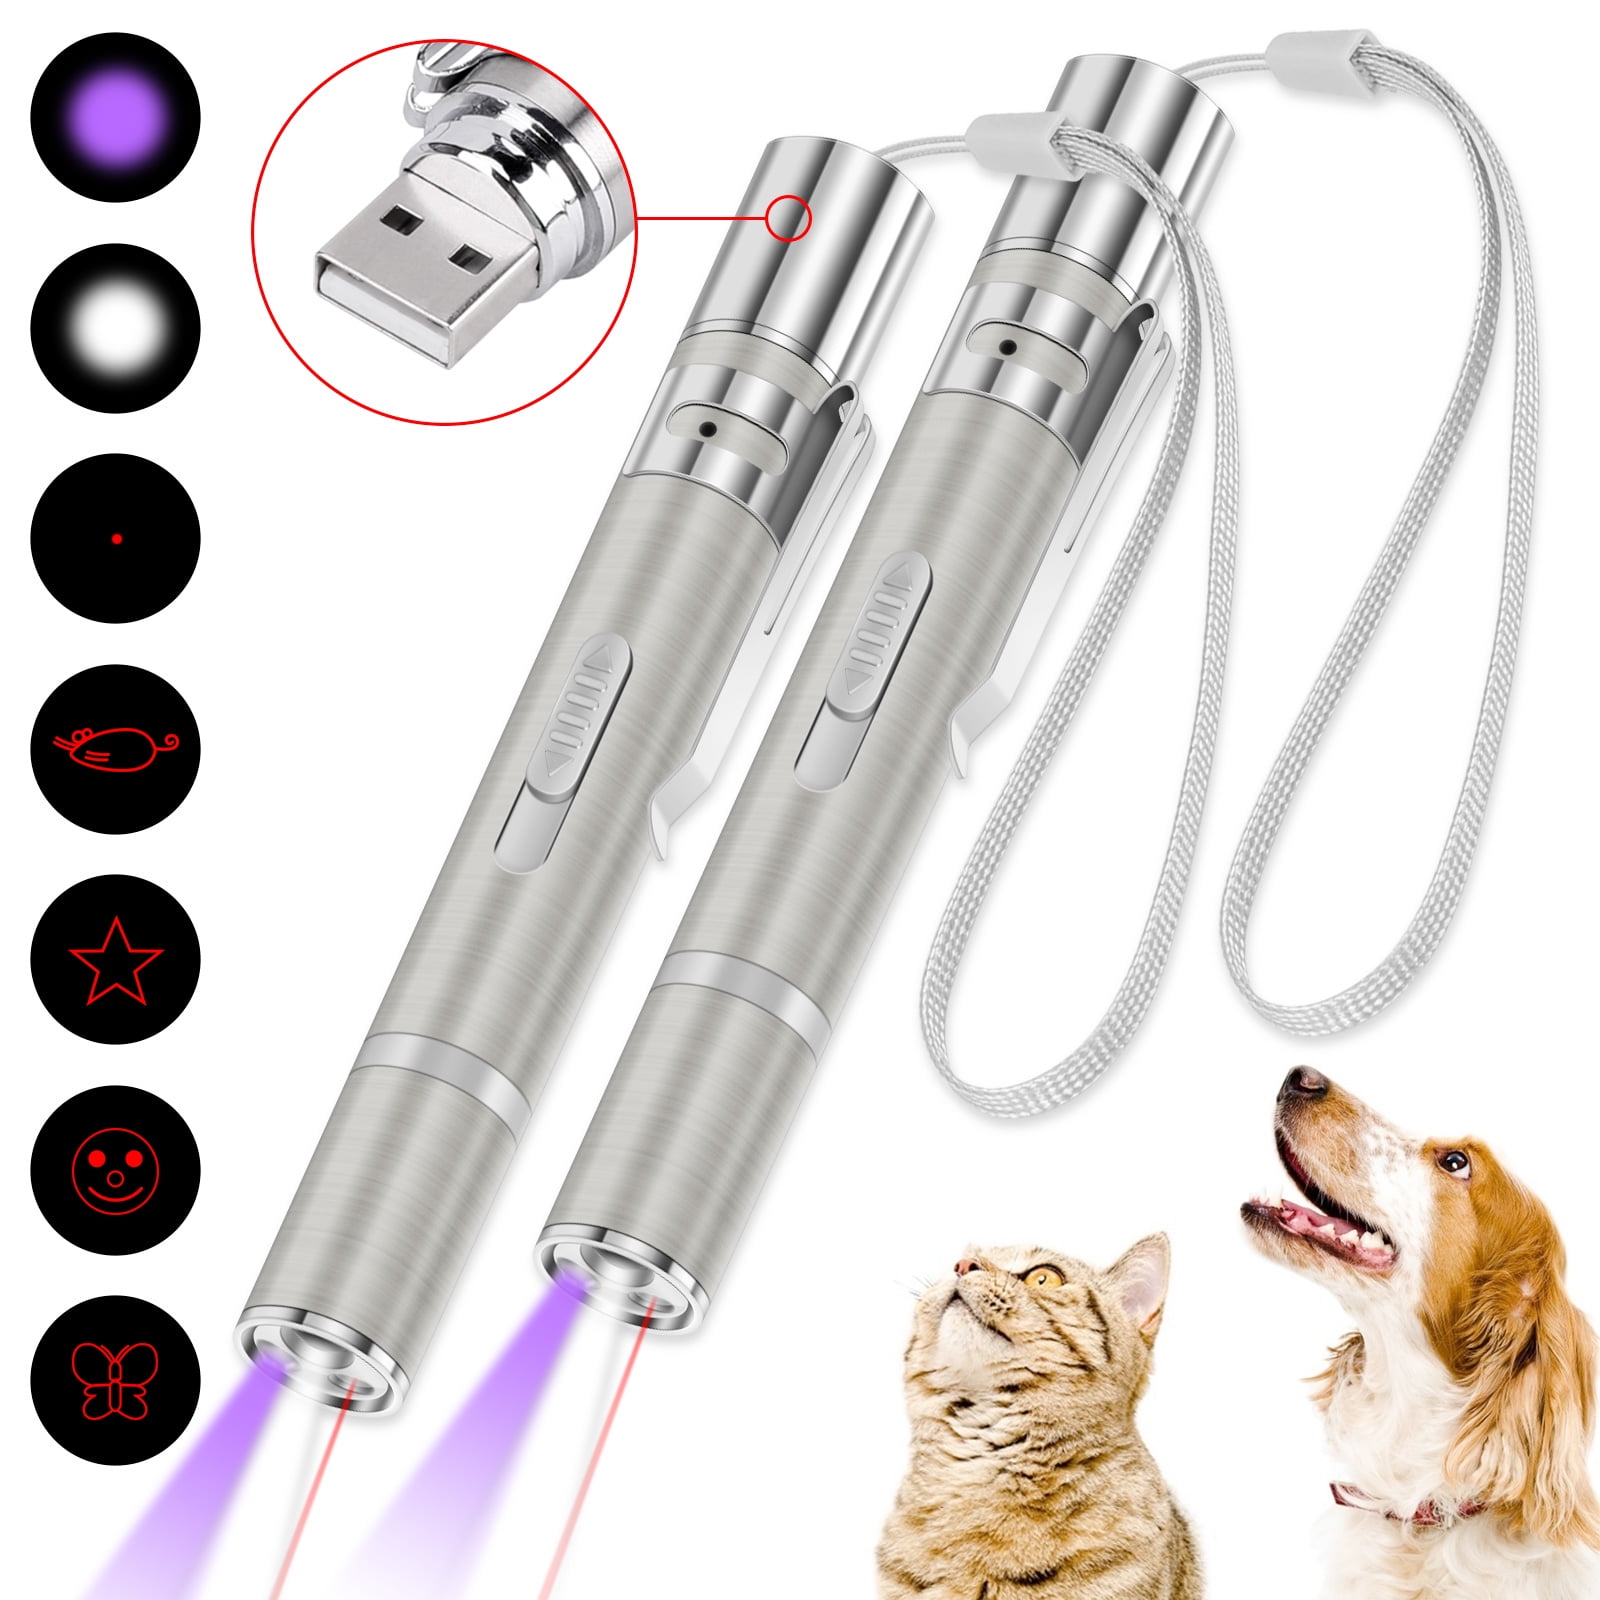 Details about   2 in 1 USB Rechargeable LED Light Red Laser Pointer Pen Children Cat Toy 